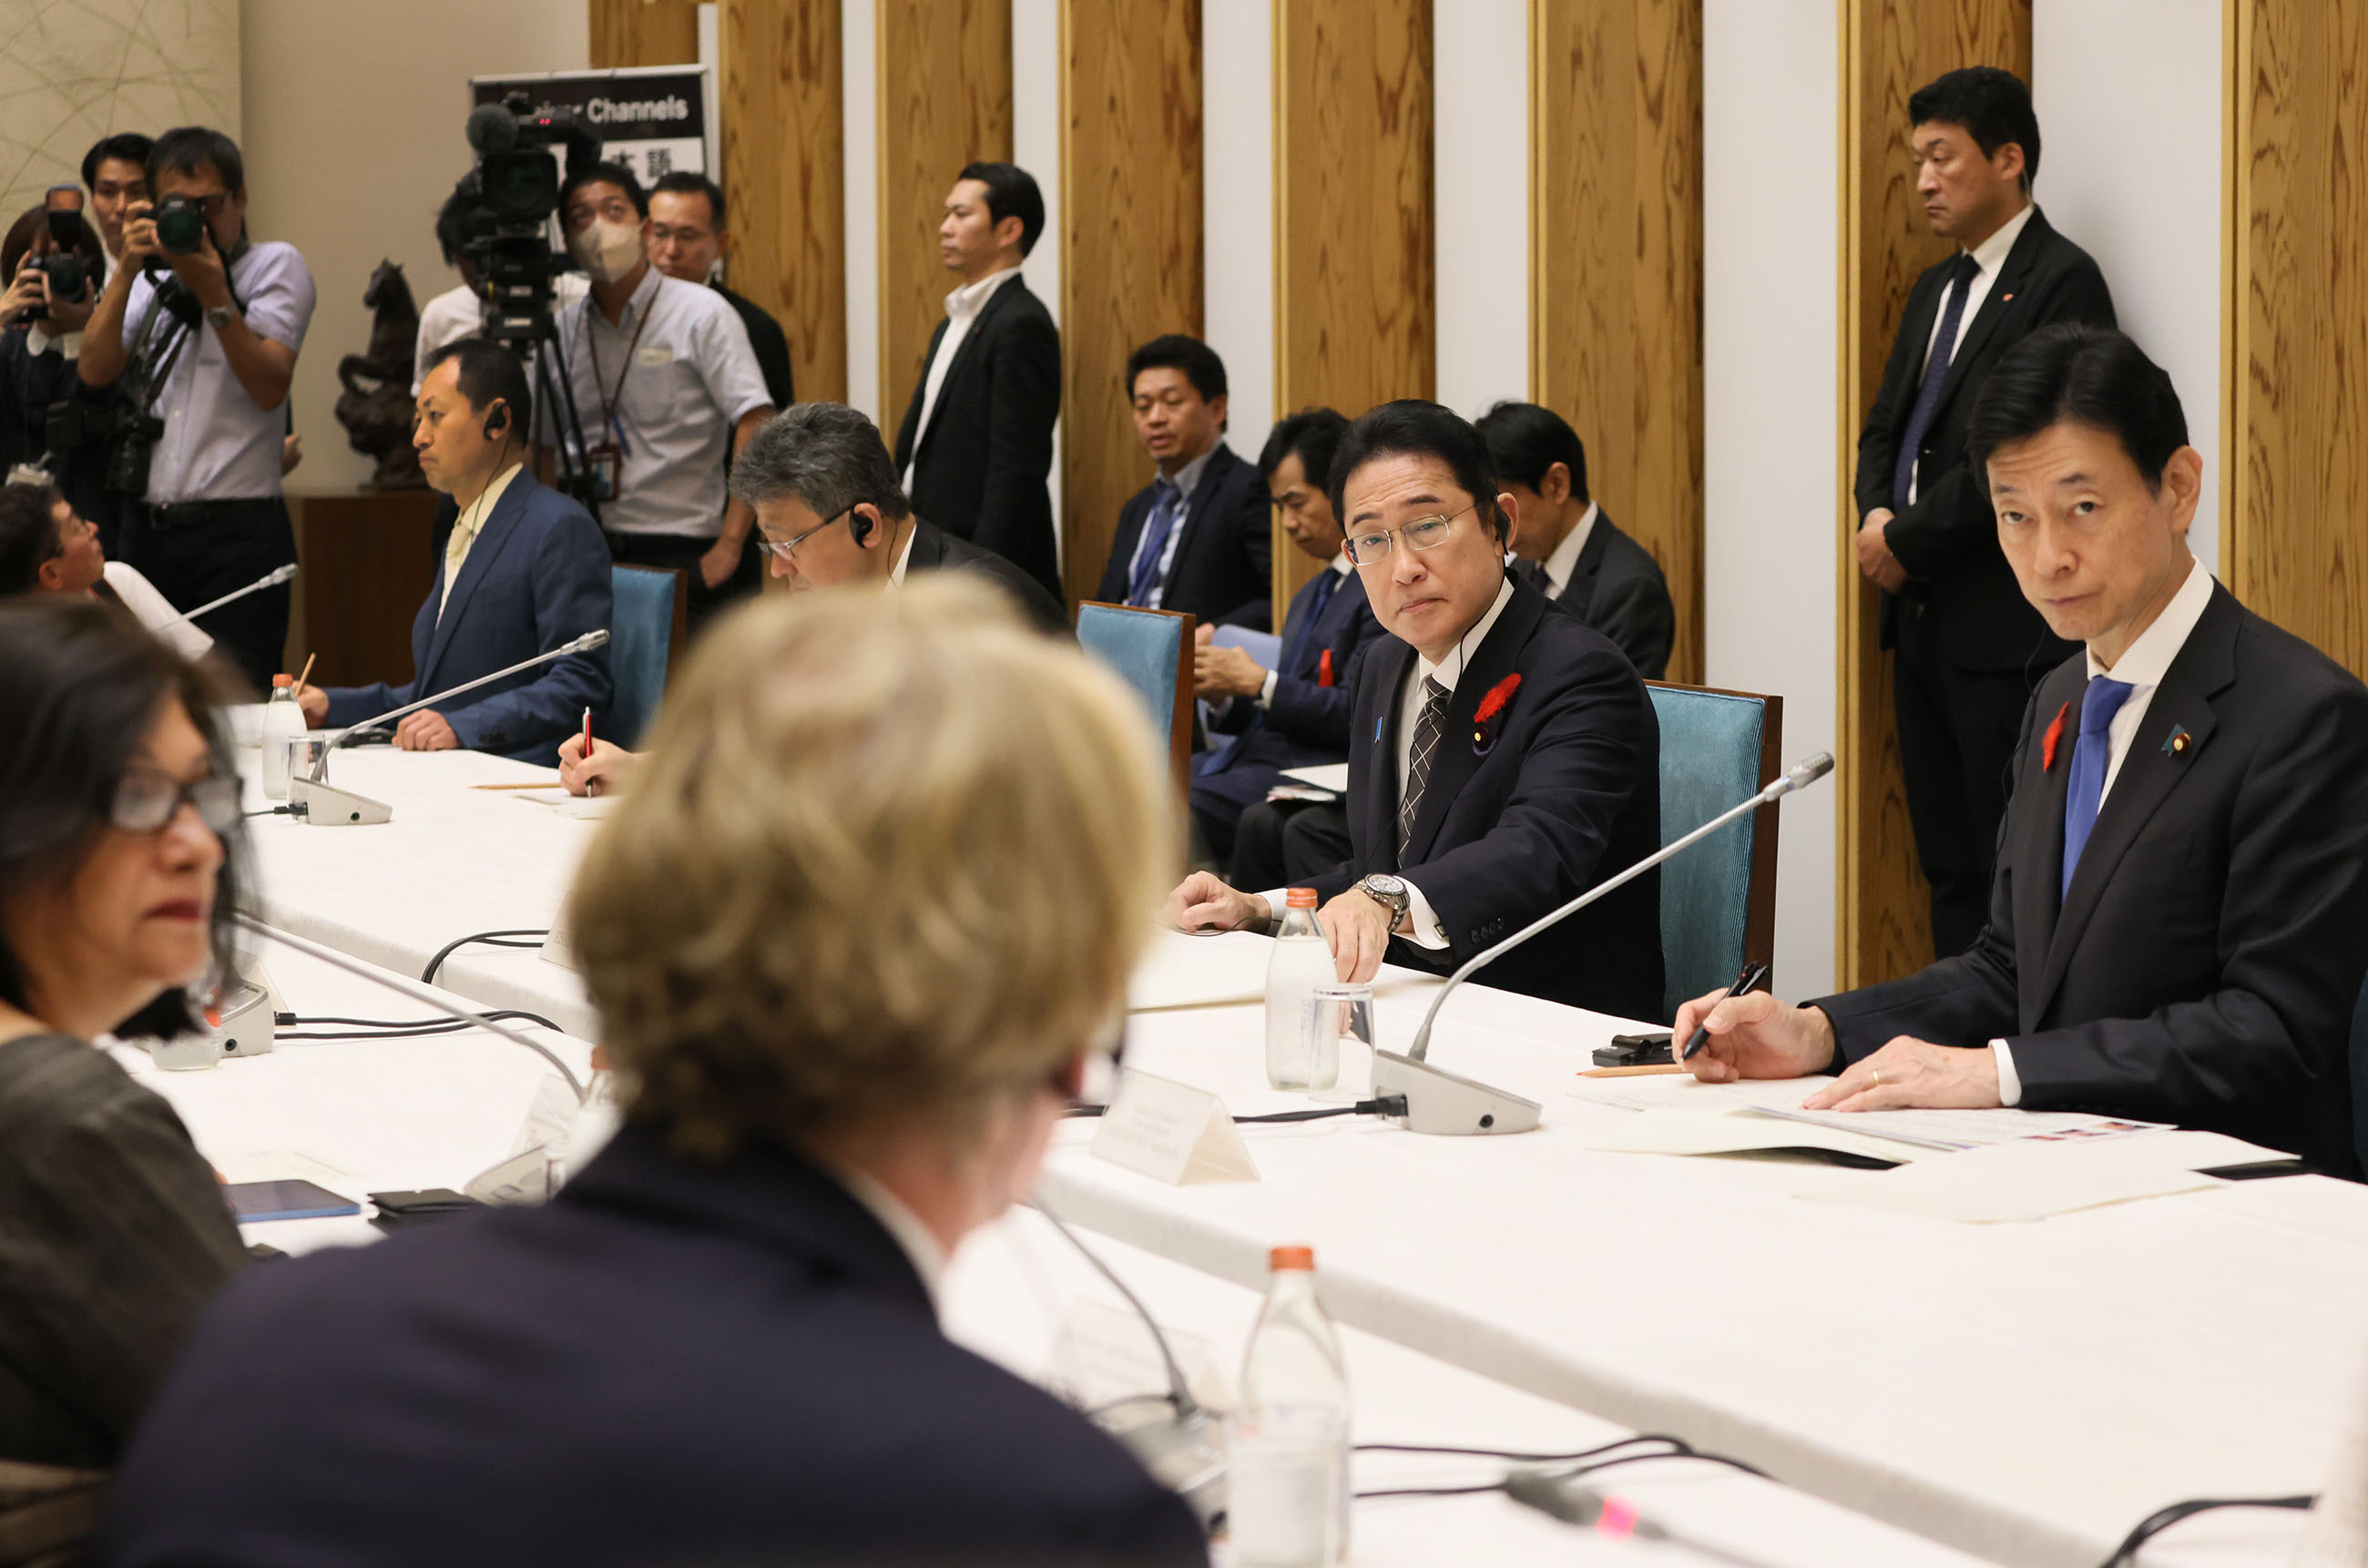 Prime Minister Kishida participating in the roundtable (1)